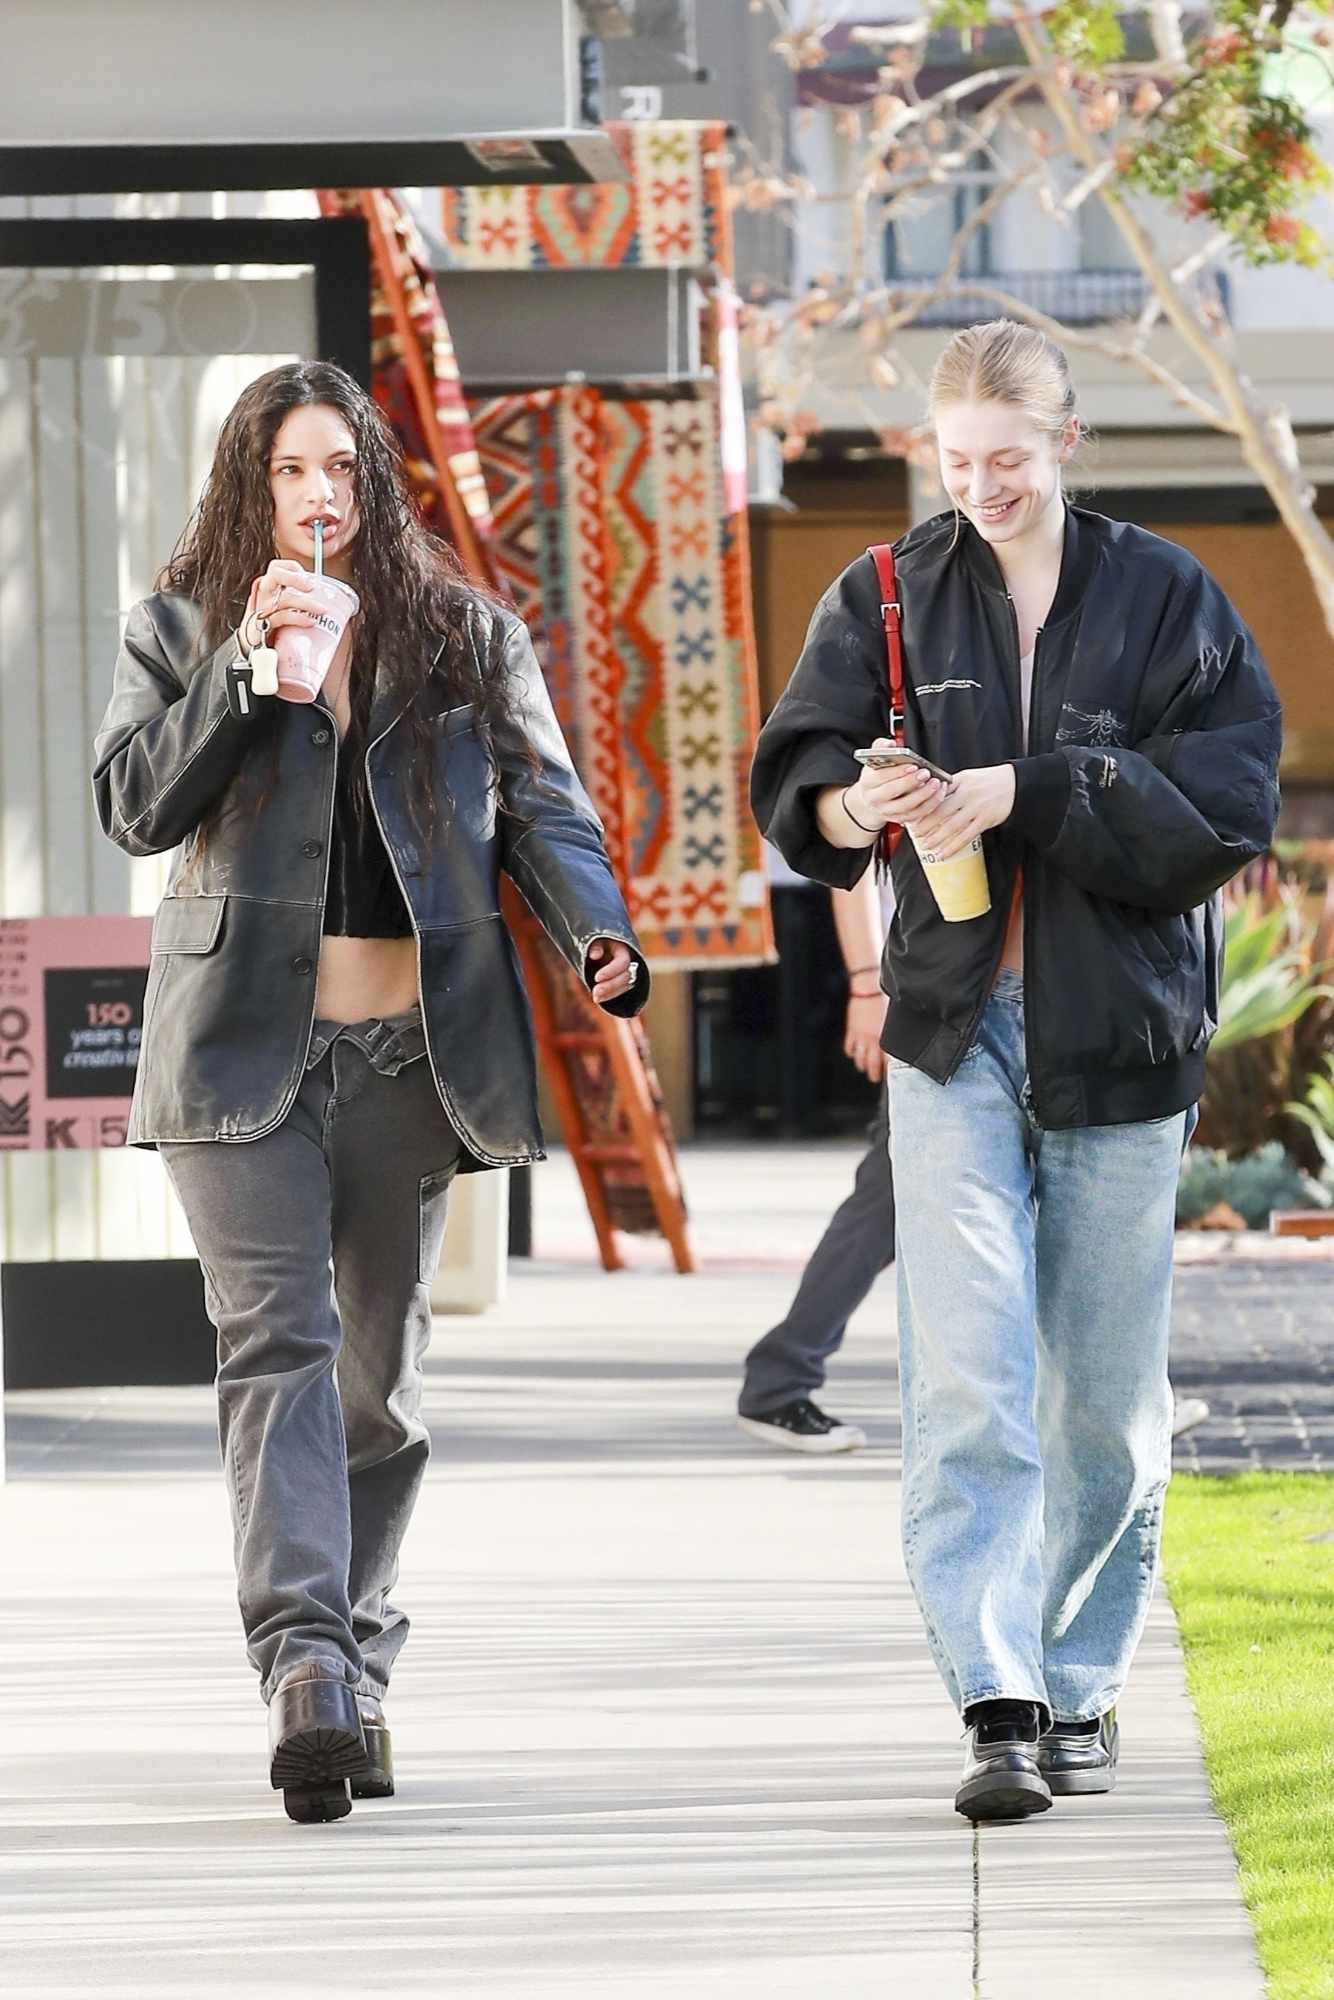 Singer Rosalia & actress Hunter Schafer seen drinking Erewhon smoothies & wearing matching outfits in Los Angeles